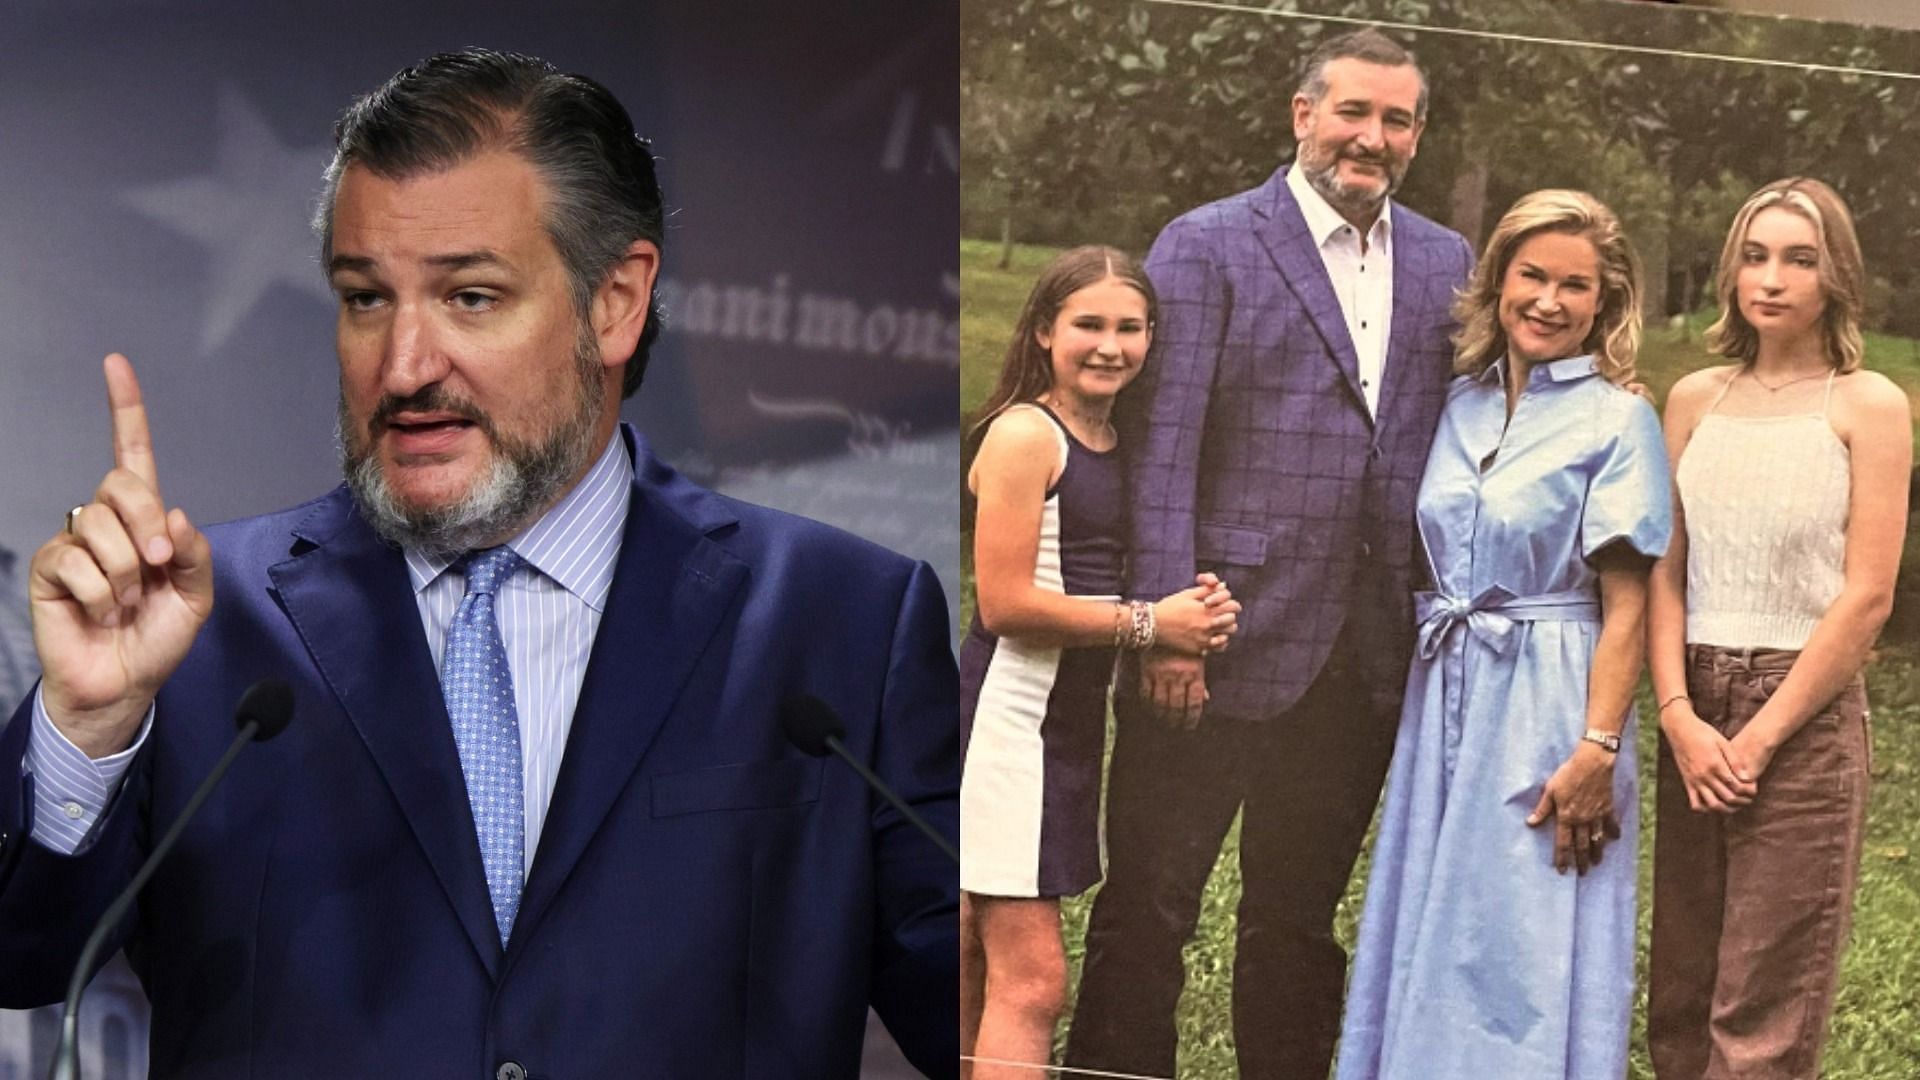 Ted Cruz and his family (Images via Getty Images and Twitter)